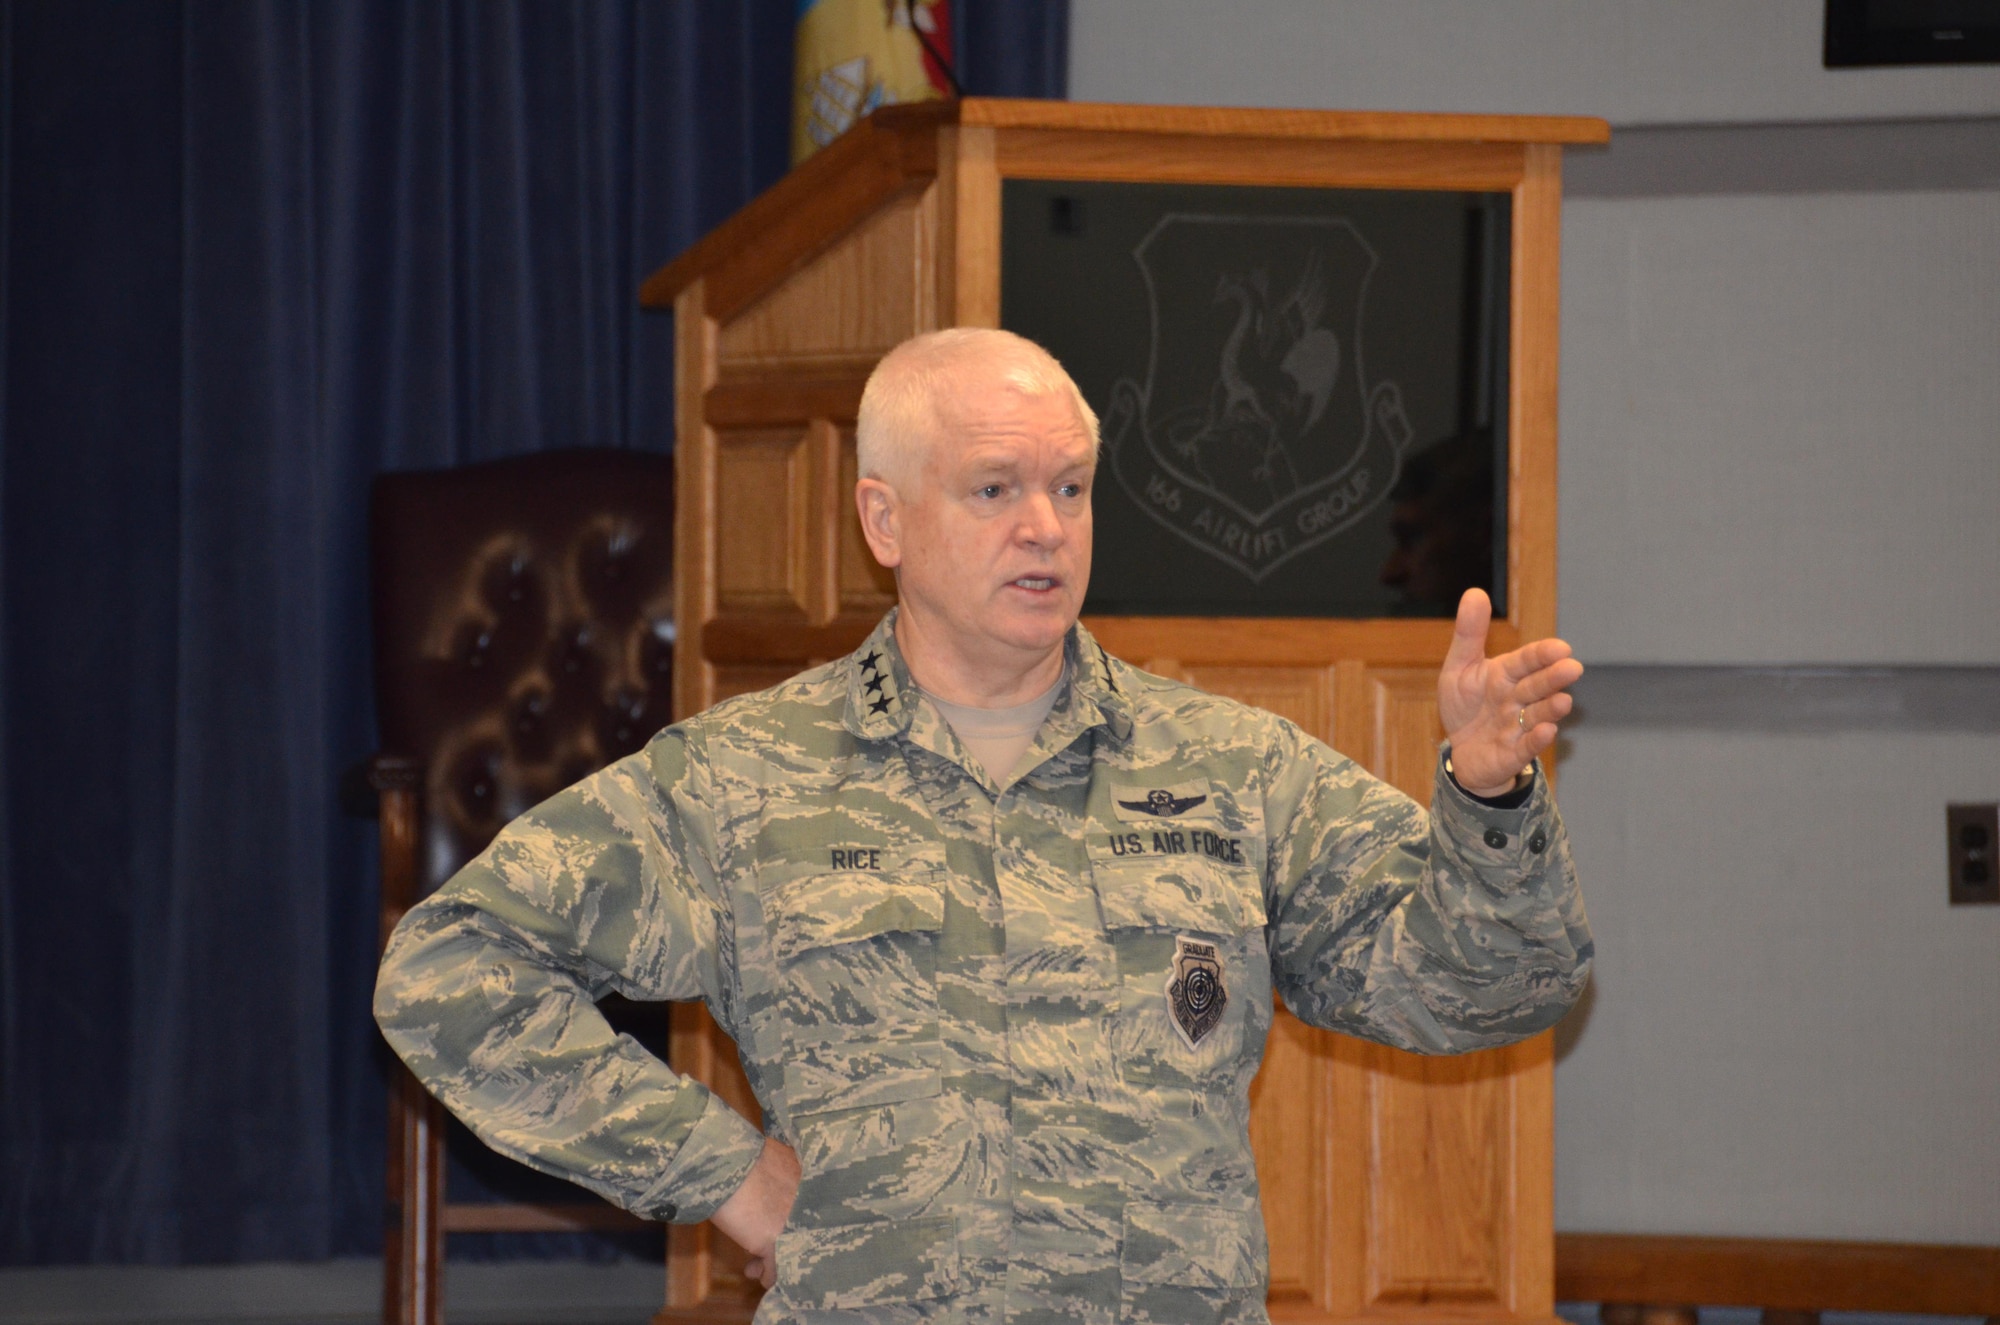 NEW CASTLE AIR NATIONAL GUARD BASE, Del.- Lt. Gen. L. Scott Rice, Director, Air National Guard, speaks to Chief Master Sergeants and enlisted senior leadership about the wave of the future for the Air National Guard on Jan., 8, 2017. Gen. Rice, and Chief Master Sgt. Ronald C. Anderson, Command Chief Master Sergeant, Air National Guard visited the Delaware Air National Guard Base on Jan. 7-8, 2016 during the January Regularly Scheduled Drill weekend. The distinguished guests met with members of multiple organizations on base and leadership. (U.S. Air National Guard photo by Tech. Sgt. Gwendolyn Blakley/ Released.